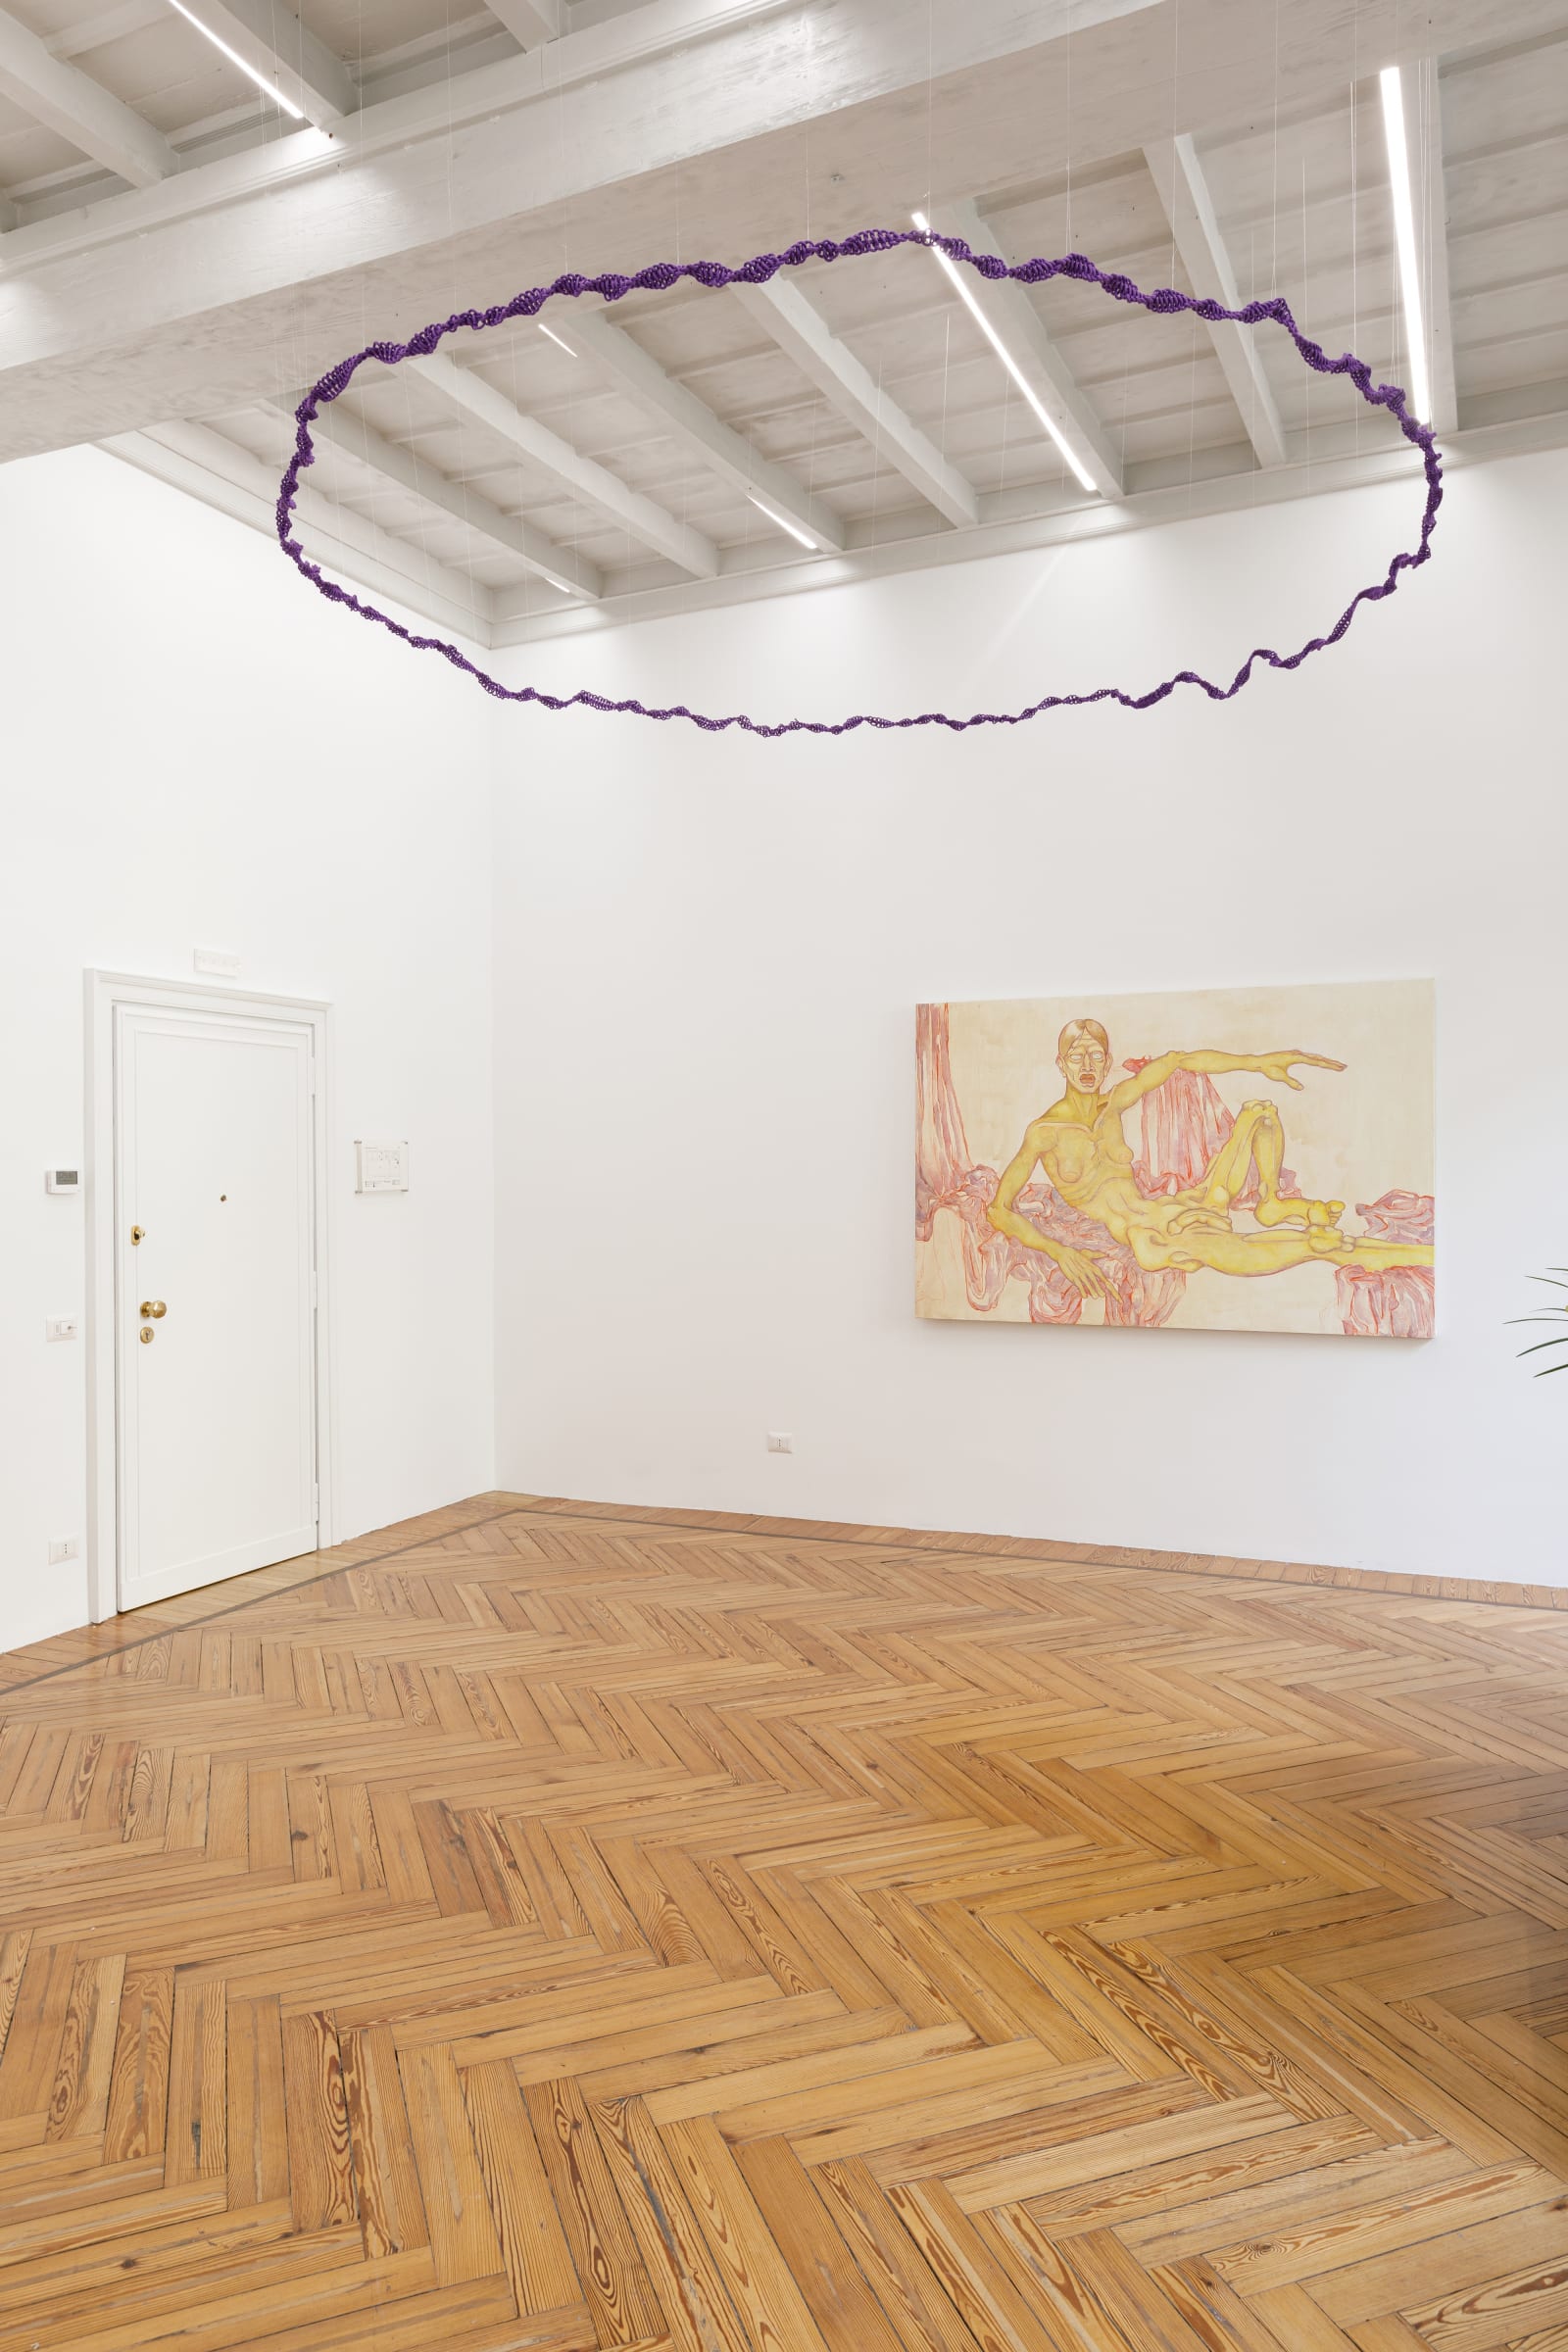 Group Exhibition September Issues Installation View June 30 – August 5, 2022 Peres Projects, Milan Photographed by: Roberto Marossi Photos